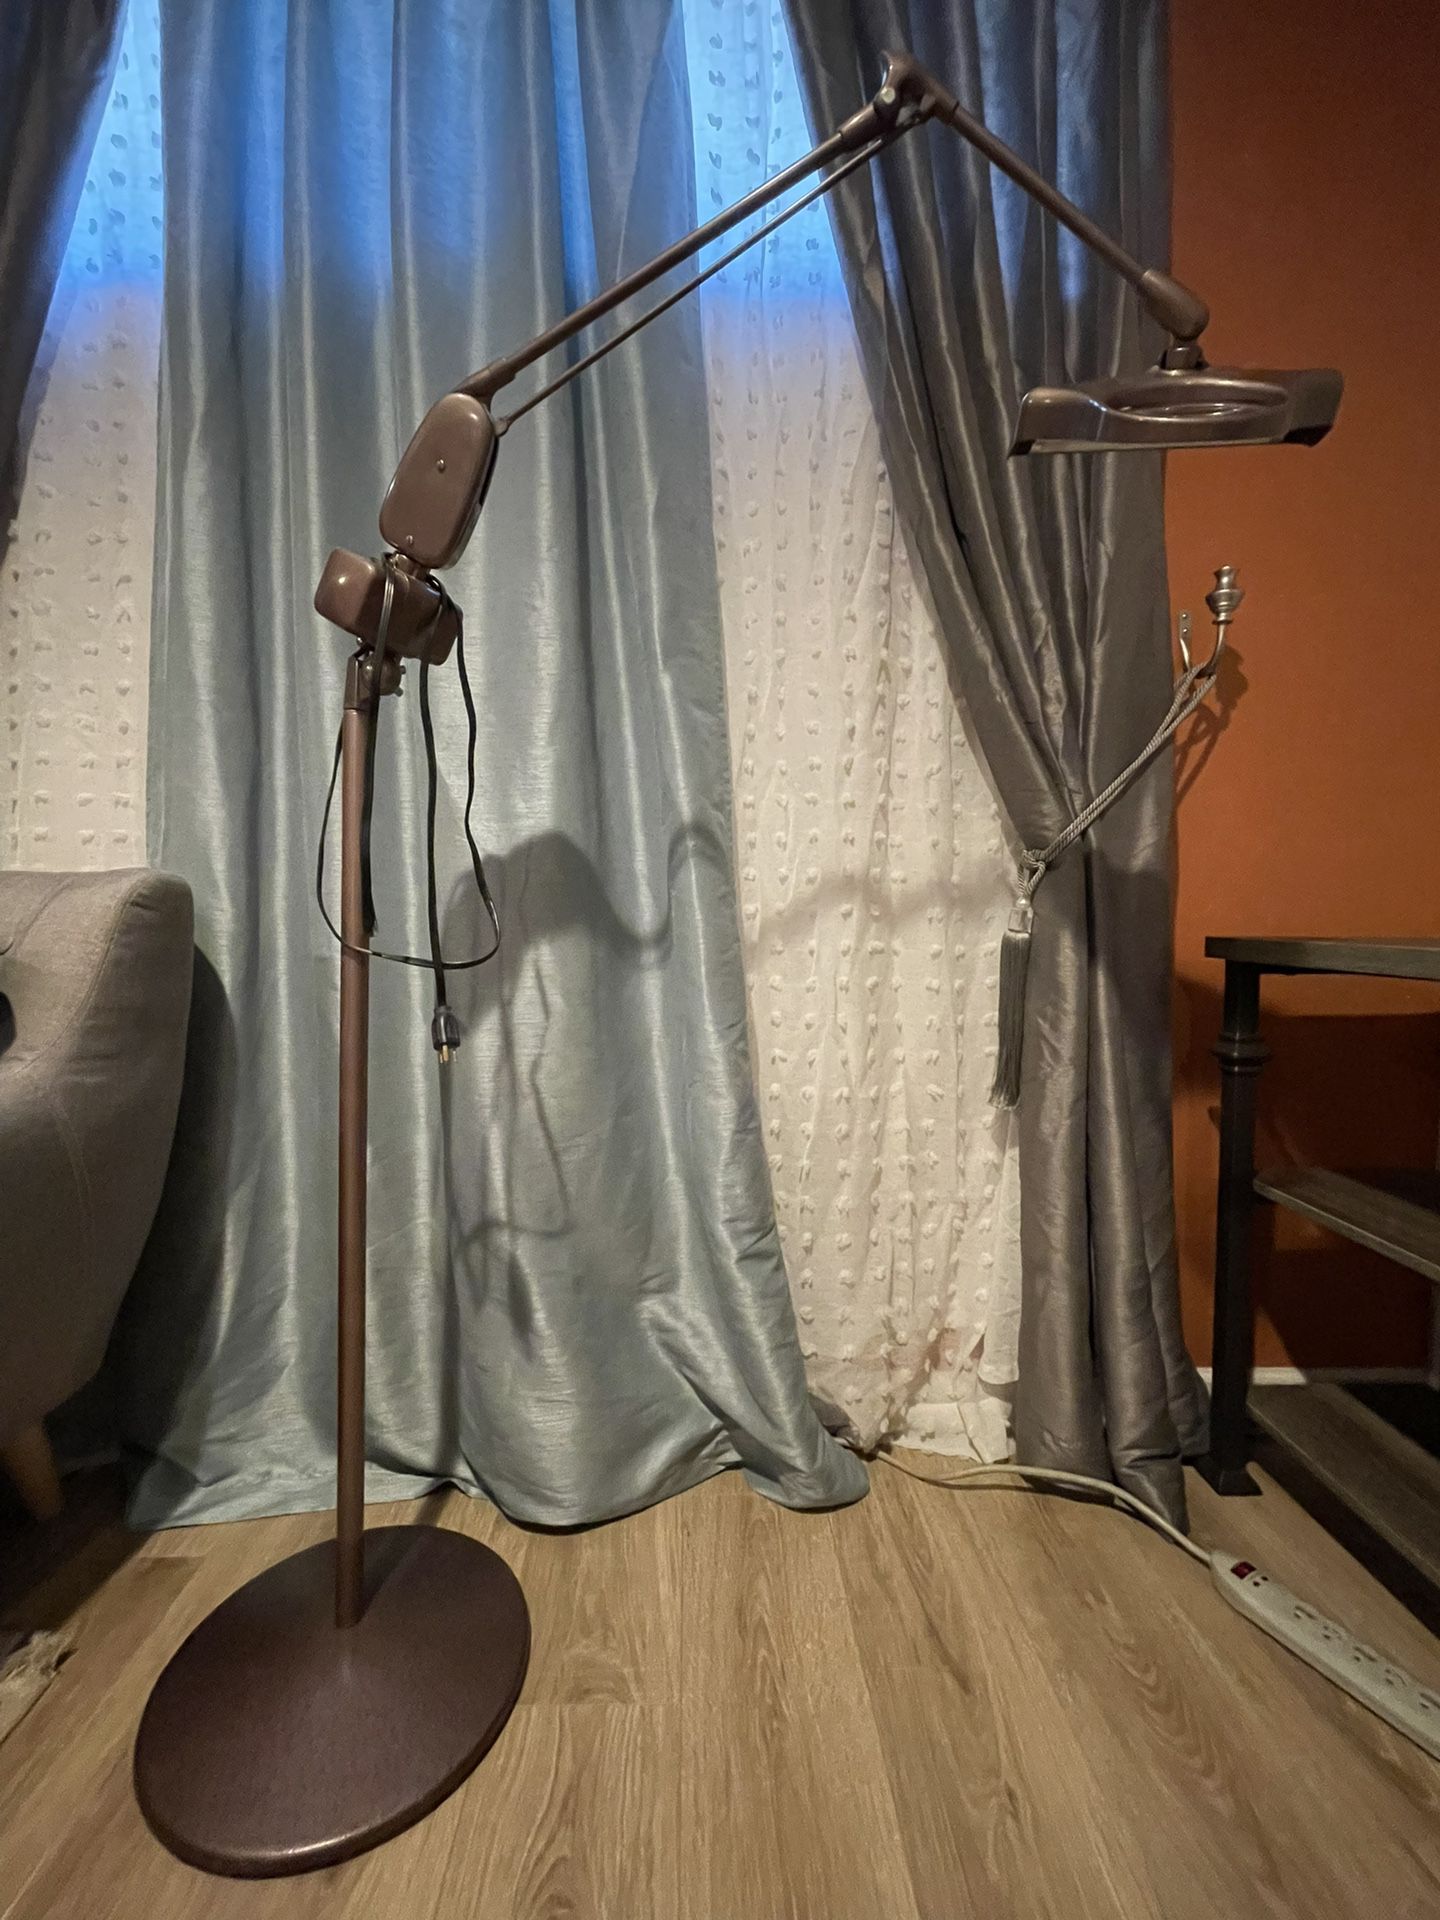 Vintage Metal Floor Lamp with Magnifier for craft , Embroidery and more.